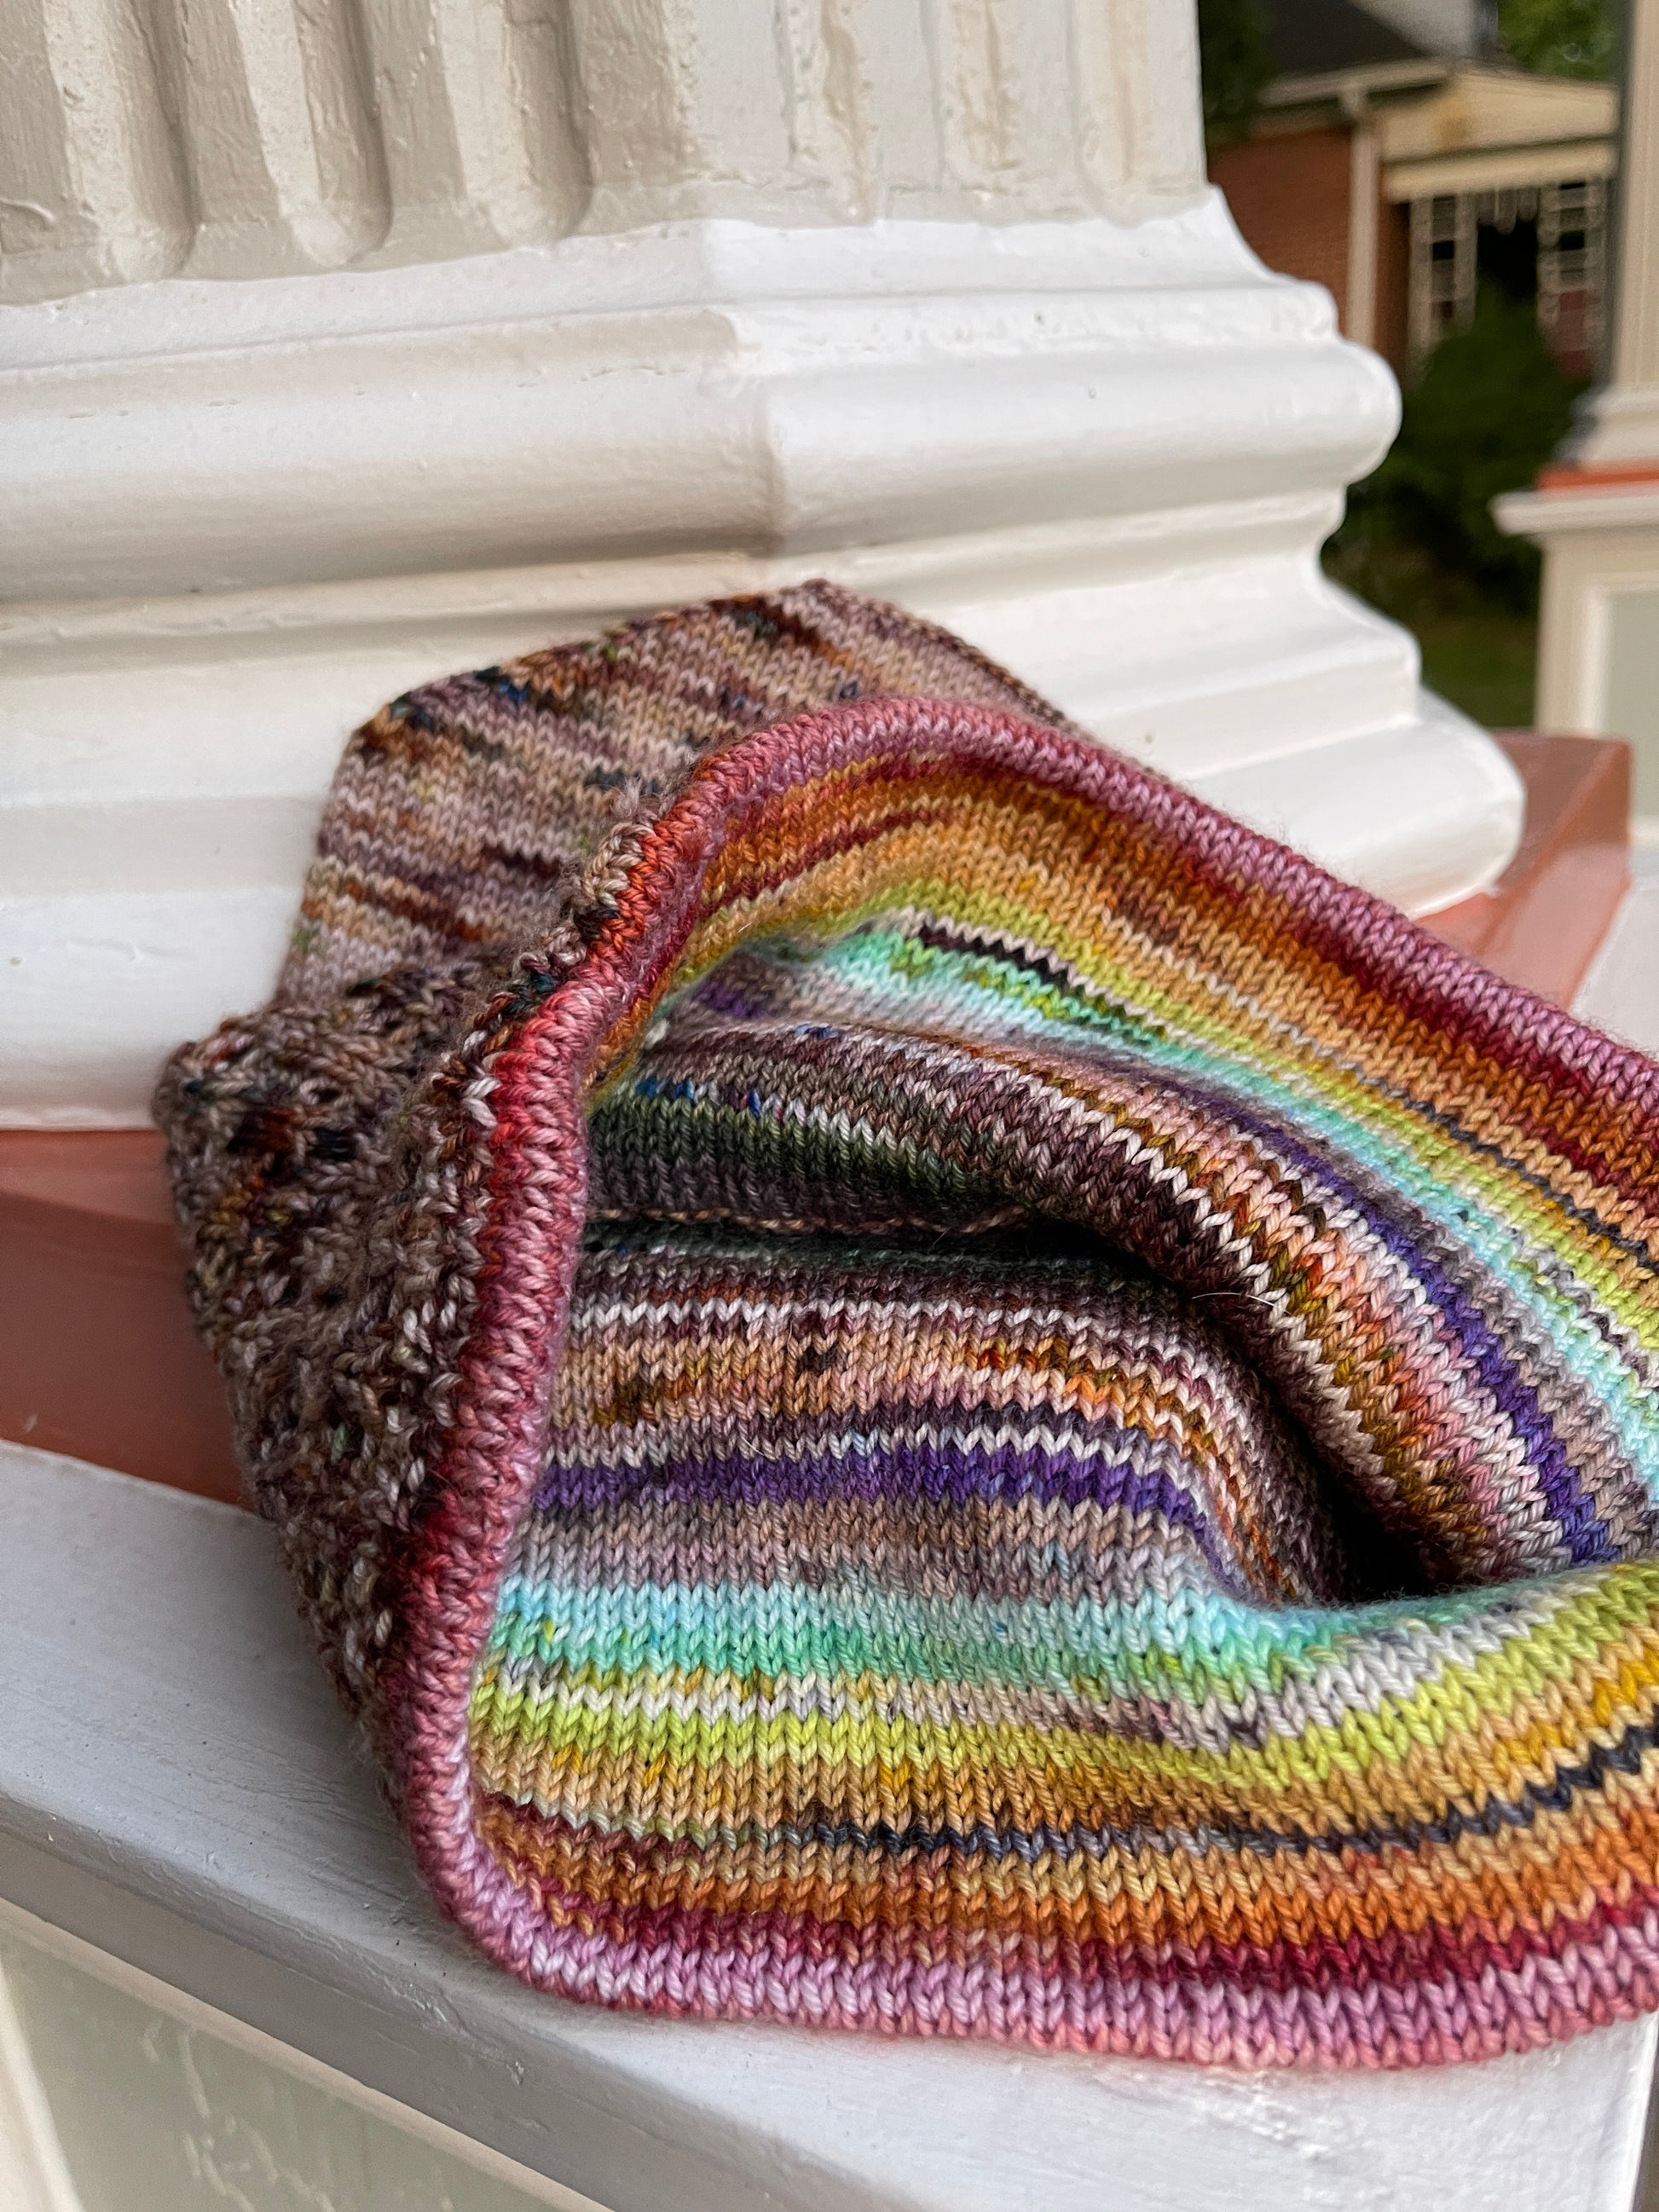 Close view of the inside of the Frightfully Drafty hat, which is striped with rainbow colors.